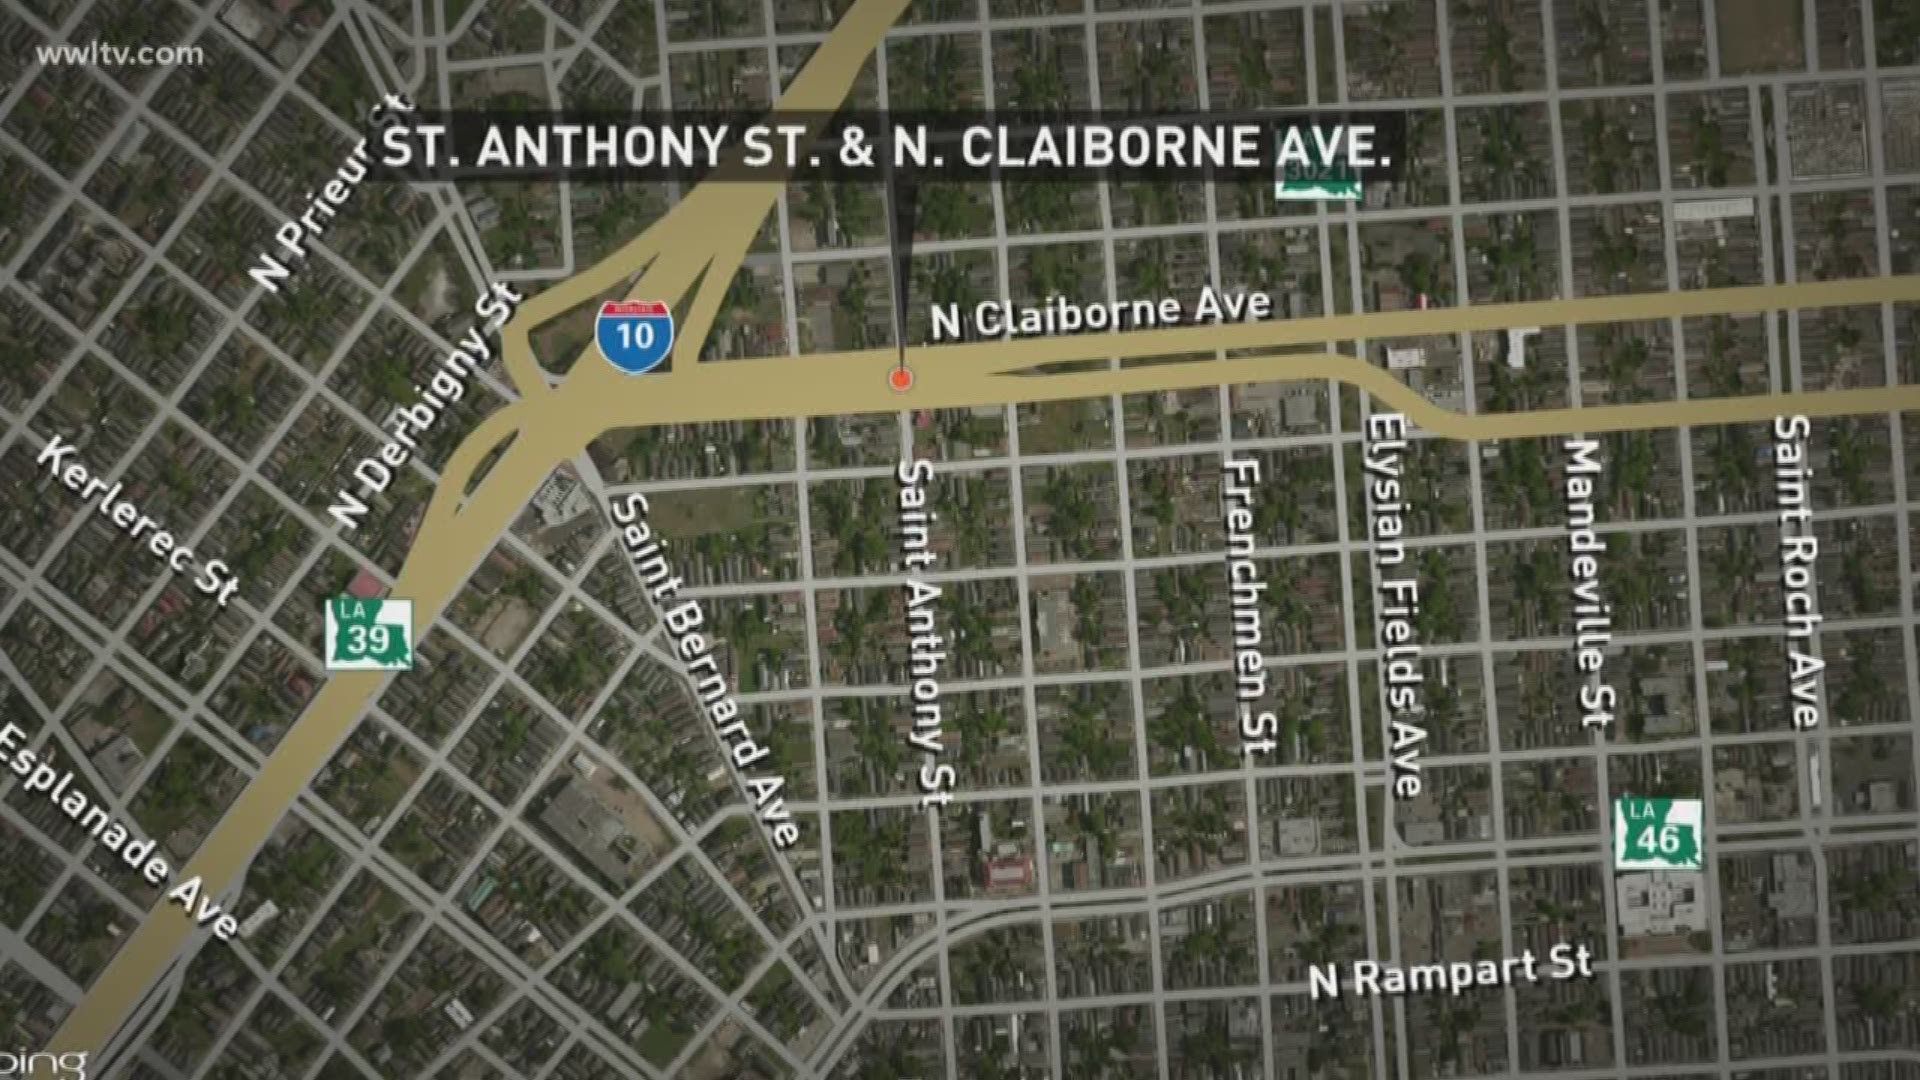 According to the New Orleans Police Department, the shooting happened around 11:47 p.m. near St. Anthony Street and North Claiborne Avenue.